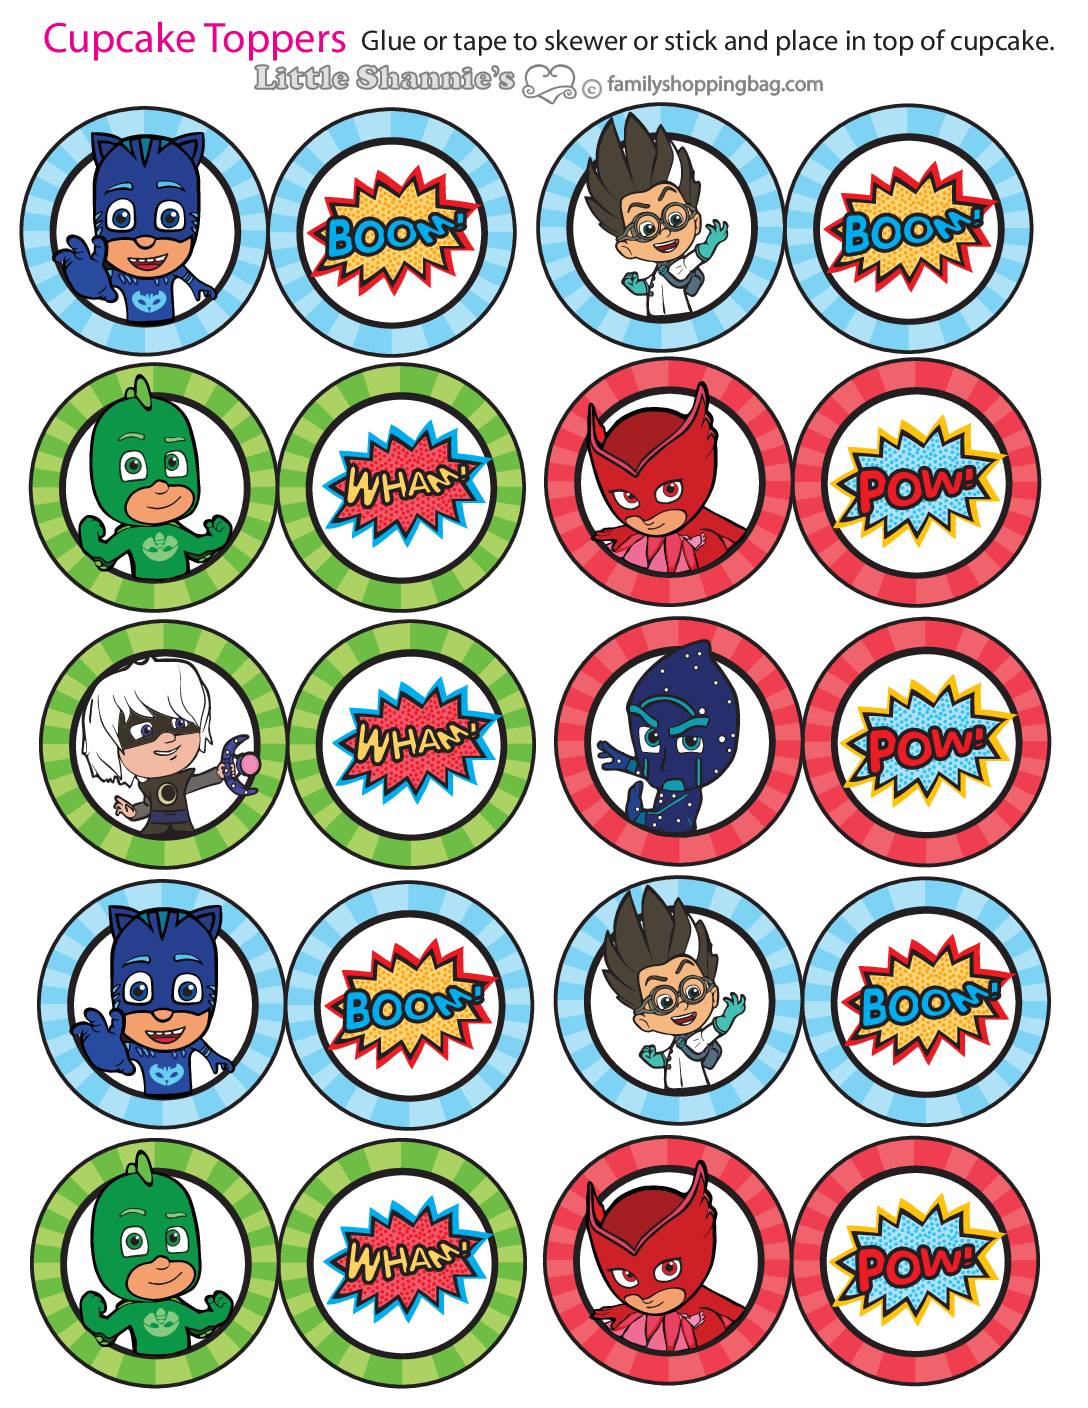 Cupcake Toppers PJ Masks Cupcake Wrappers